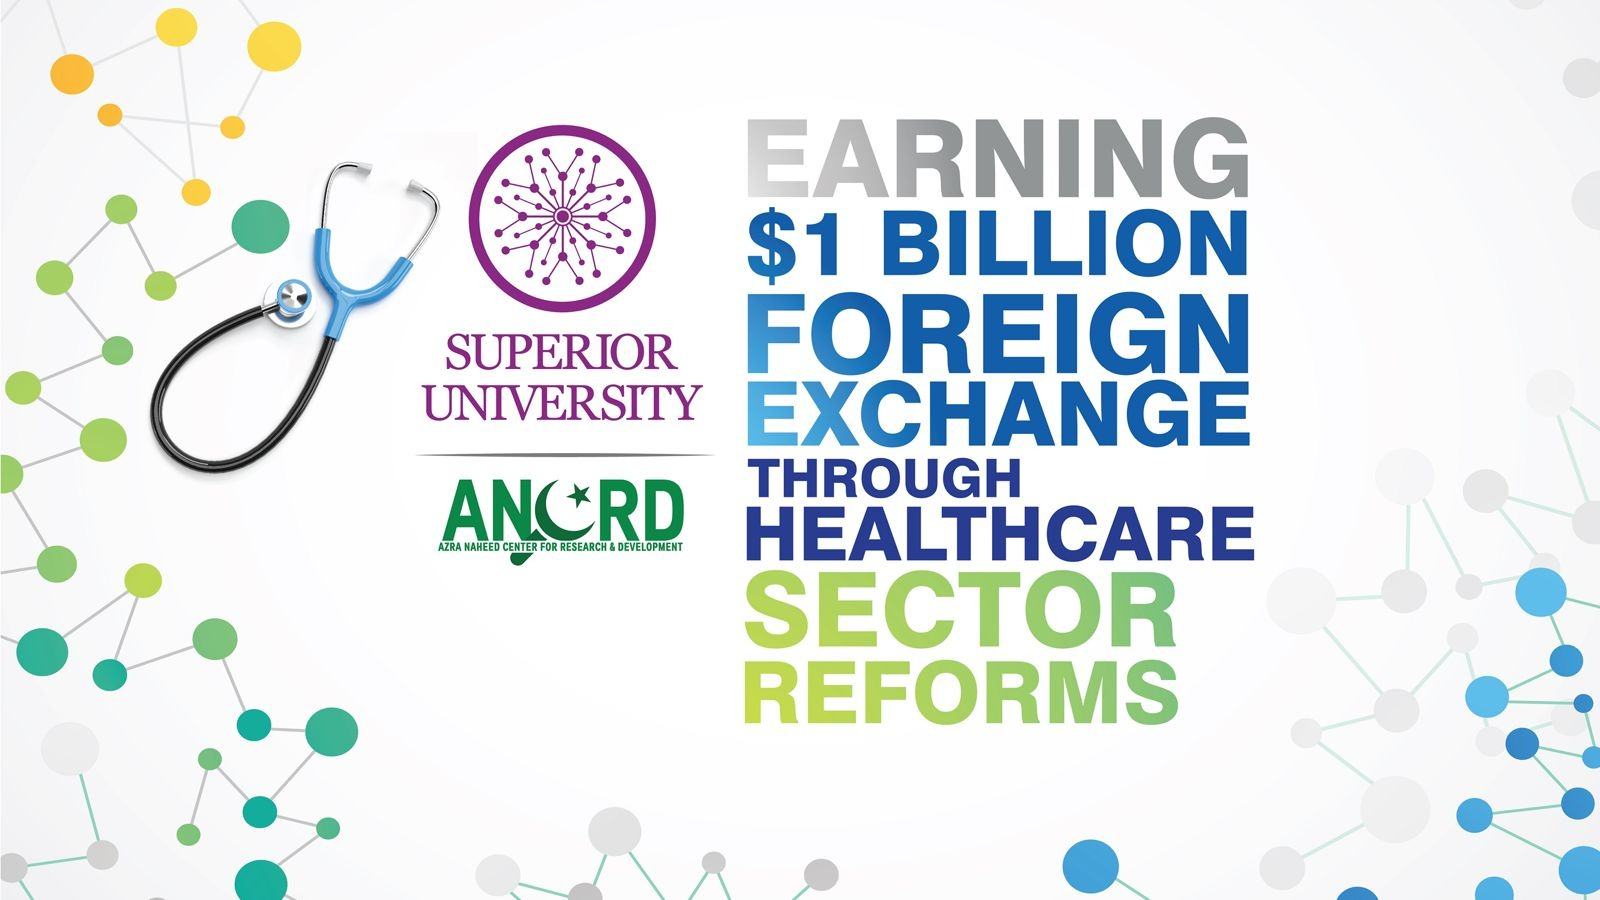 Earning $1 Billion Foreign Exchange through Healthcare